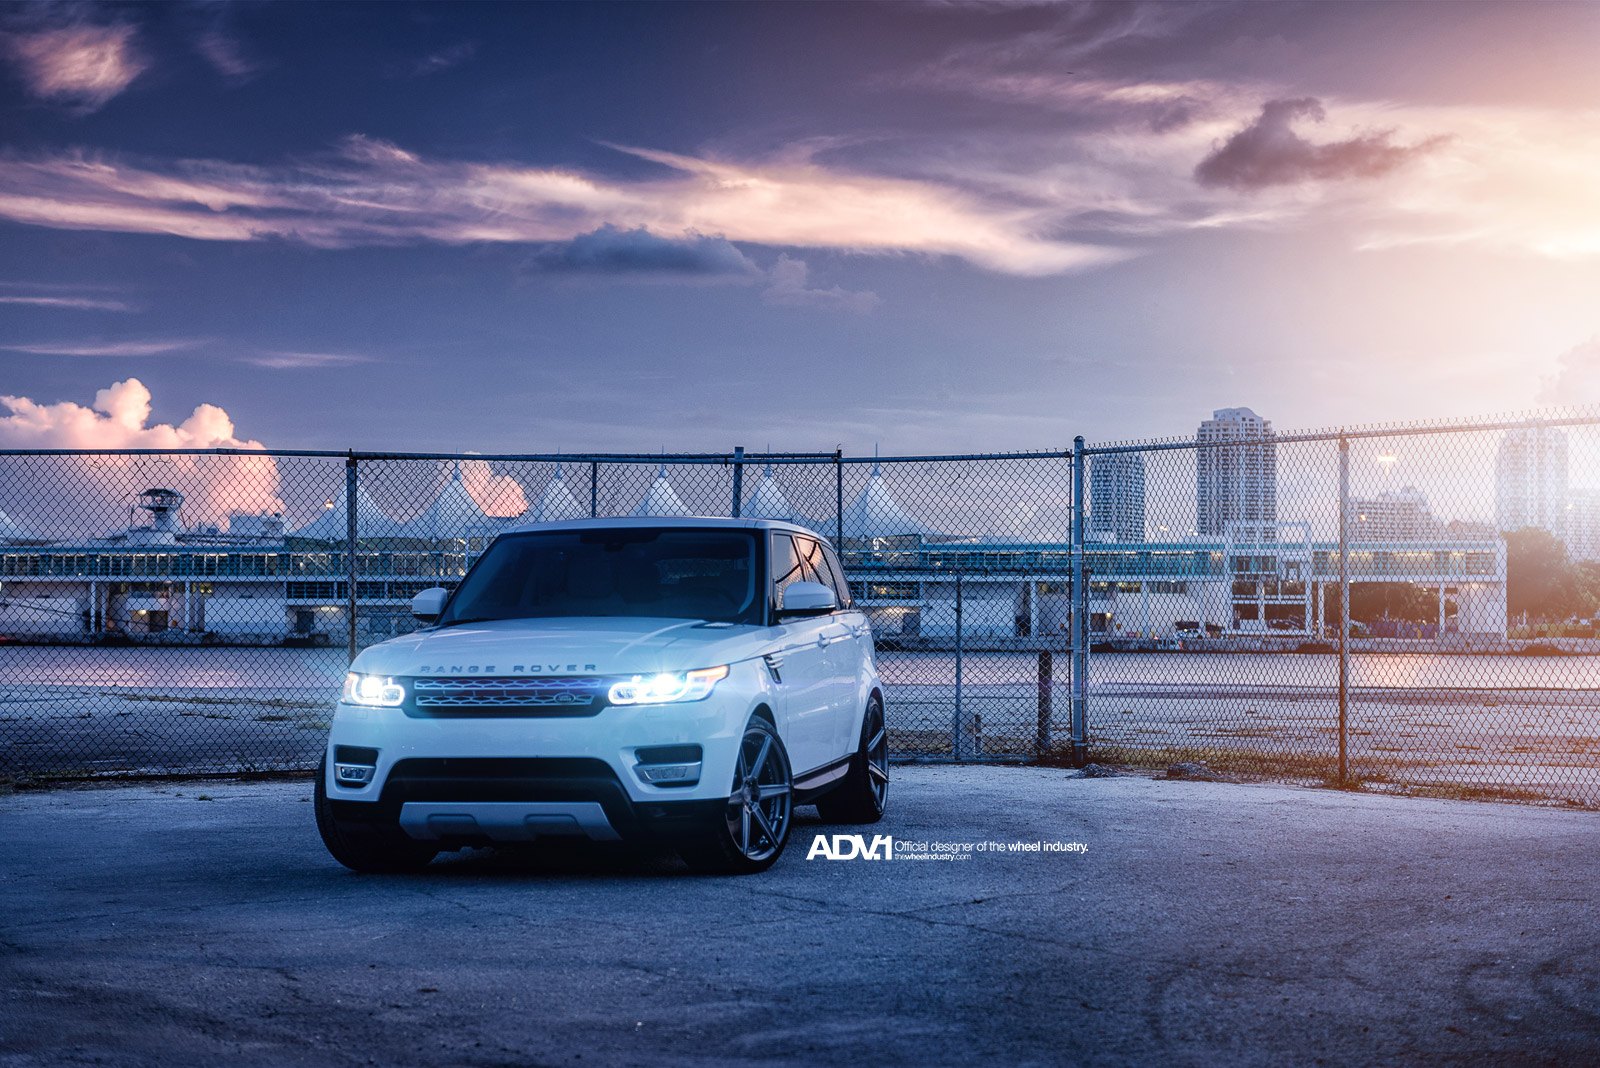 White Range Rover Sport with Halo Headlights - Photo by ADV.1